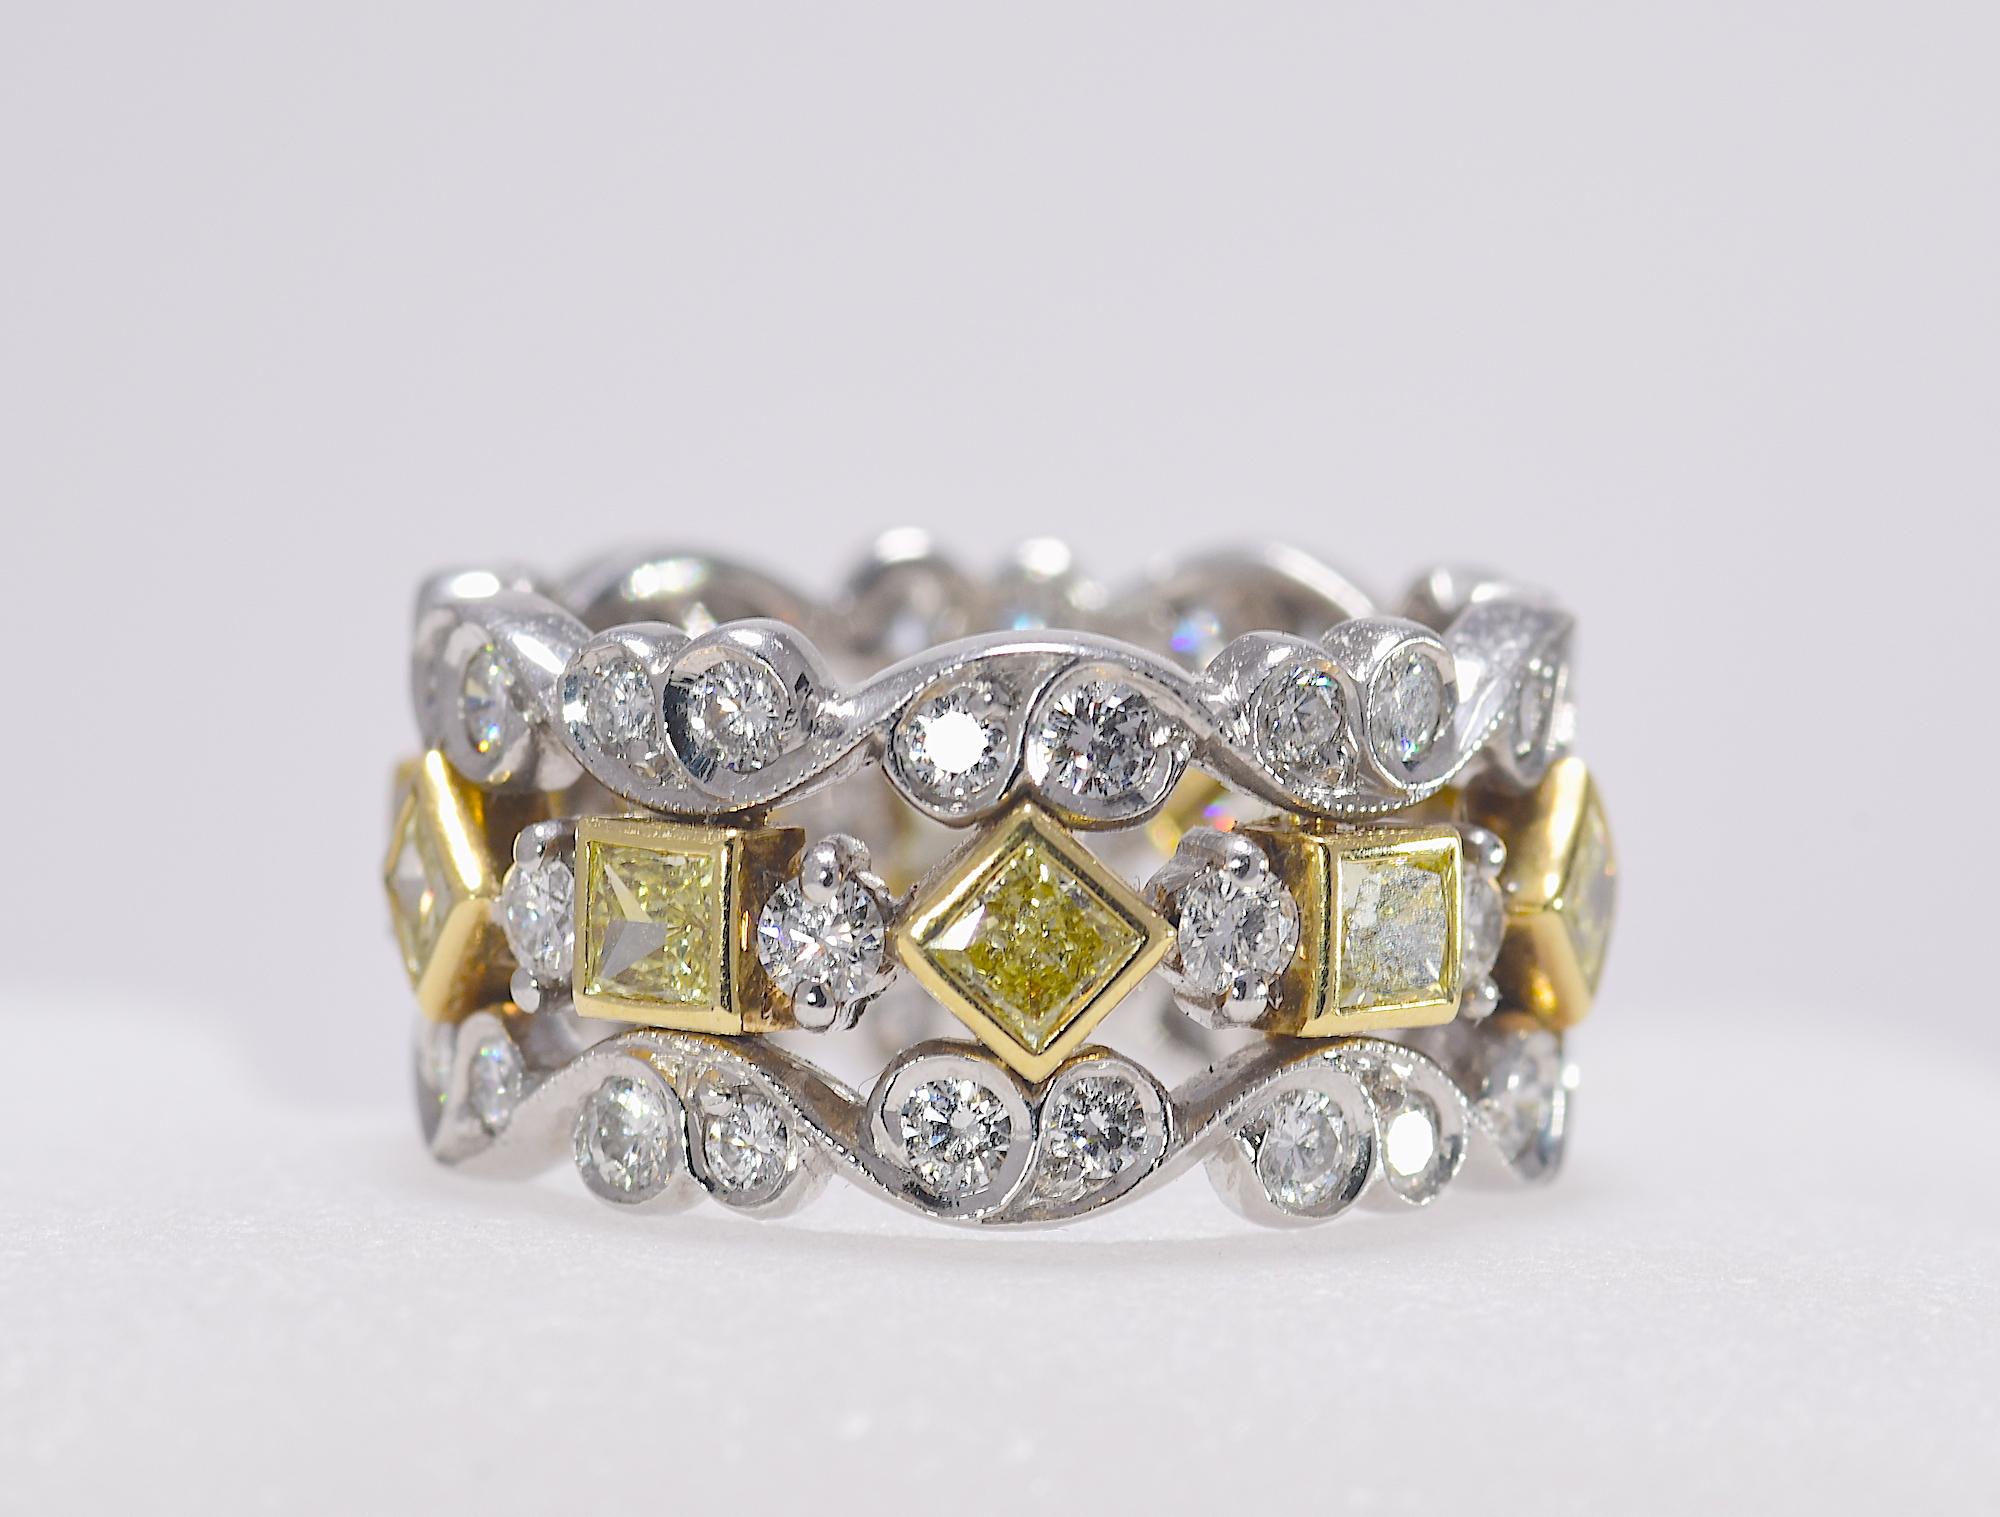 Jack Kelege Fancy Yellow & White Diamond Eternity Band 2.6 Carat TW  Plat/18K 
This exquisite Jack Kelege 18K yellow gold and platinum diamond eternity band is the perfect blend of shimmering diamonds, and artistic design.
The finger size is     .